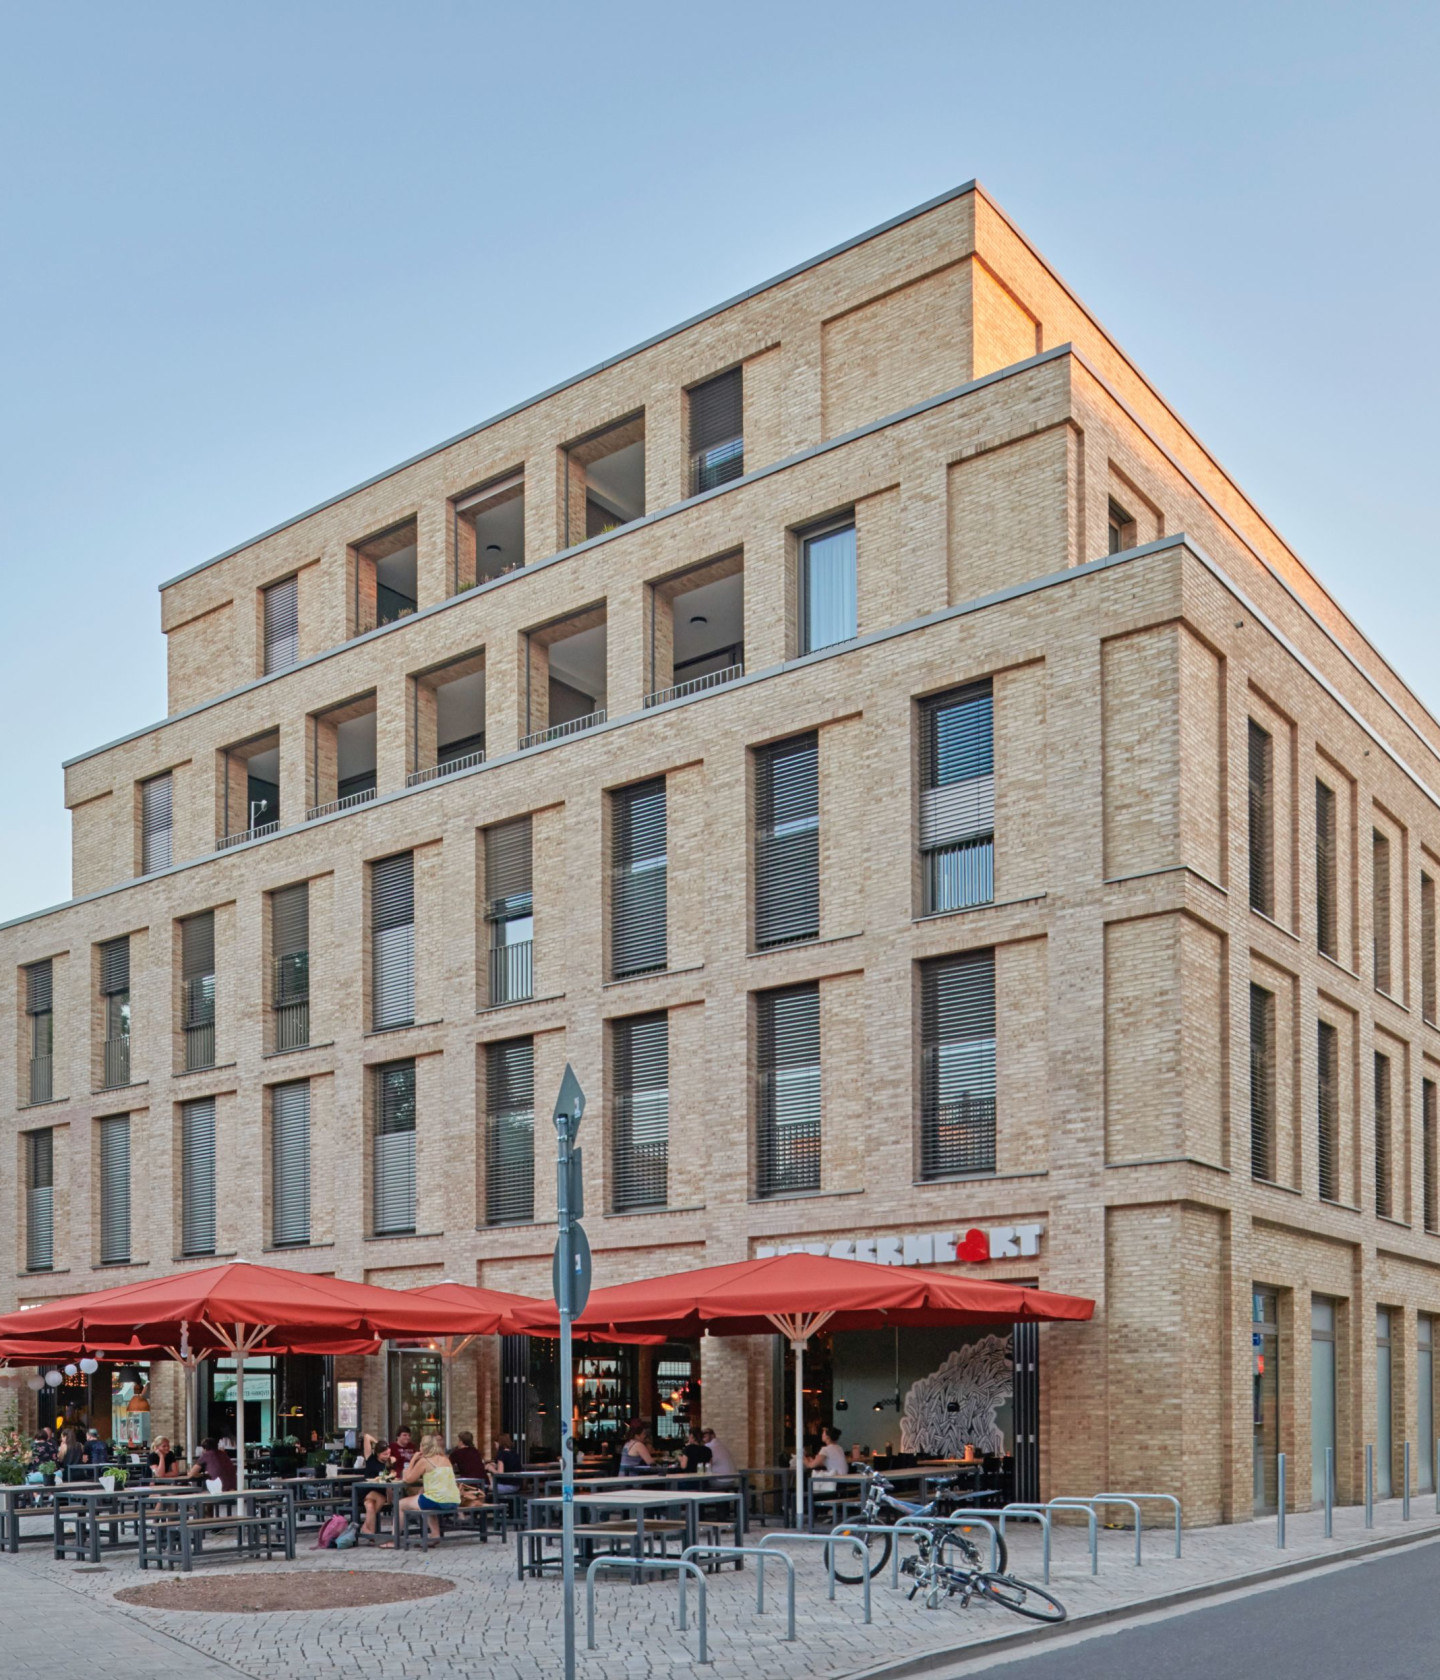 Image: The MARQ building on Marstallplatz in Hanover, with outdoor dining.